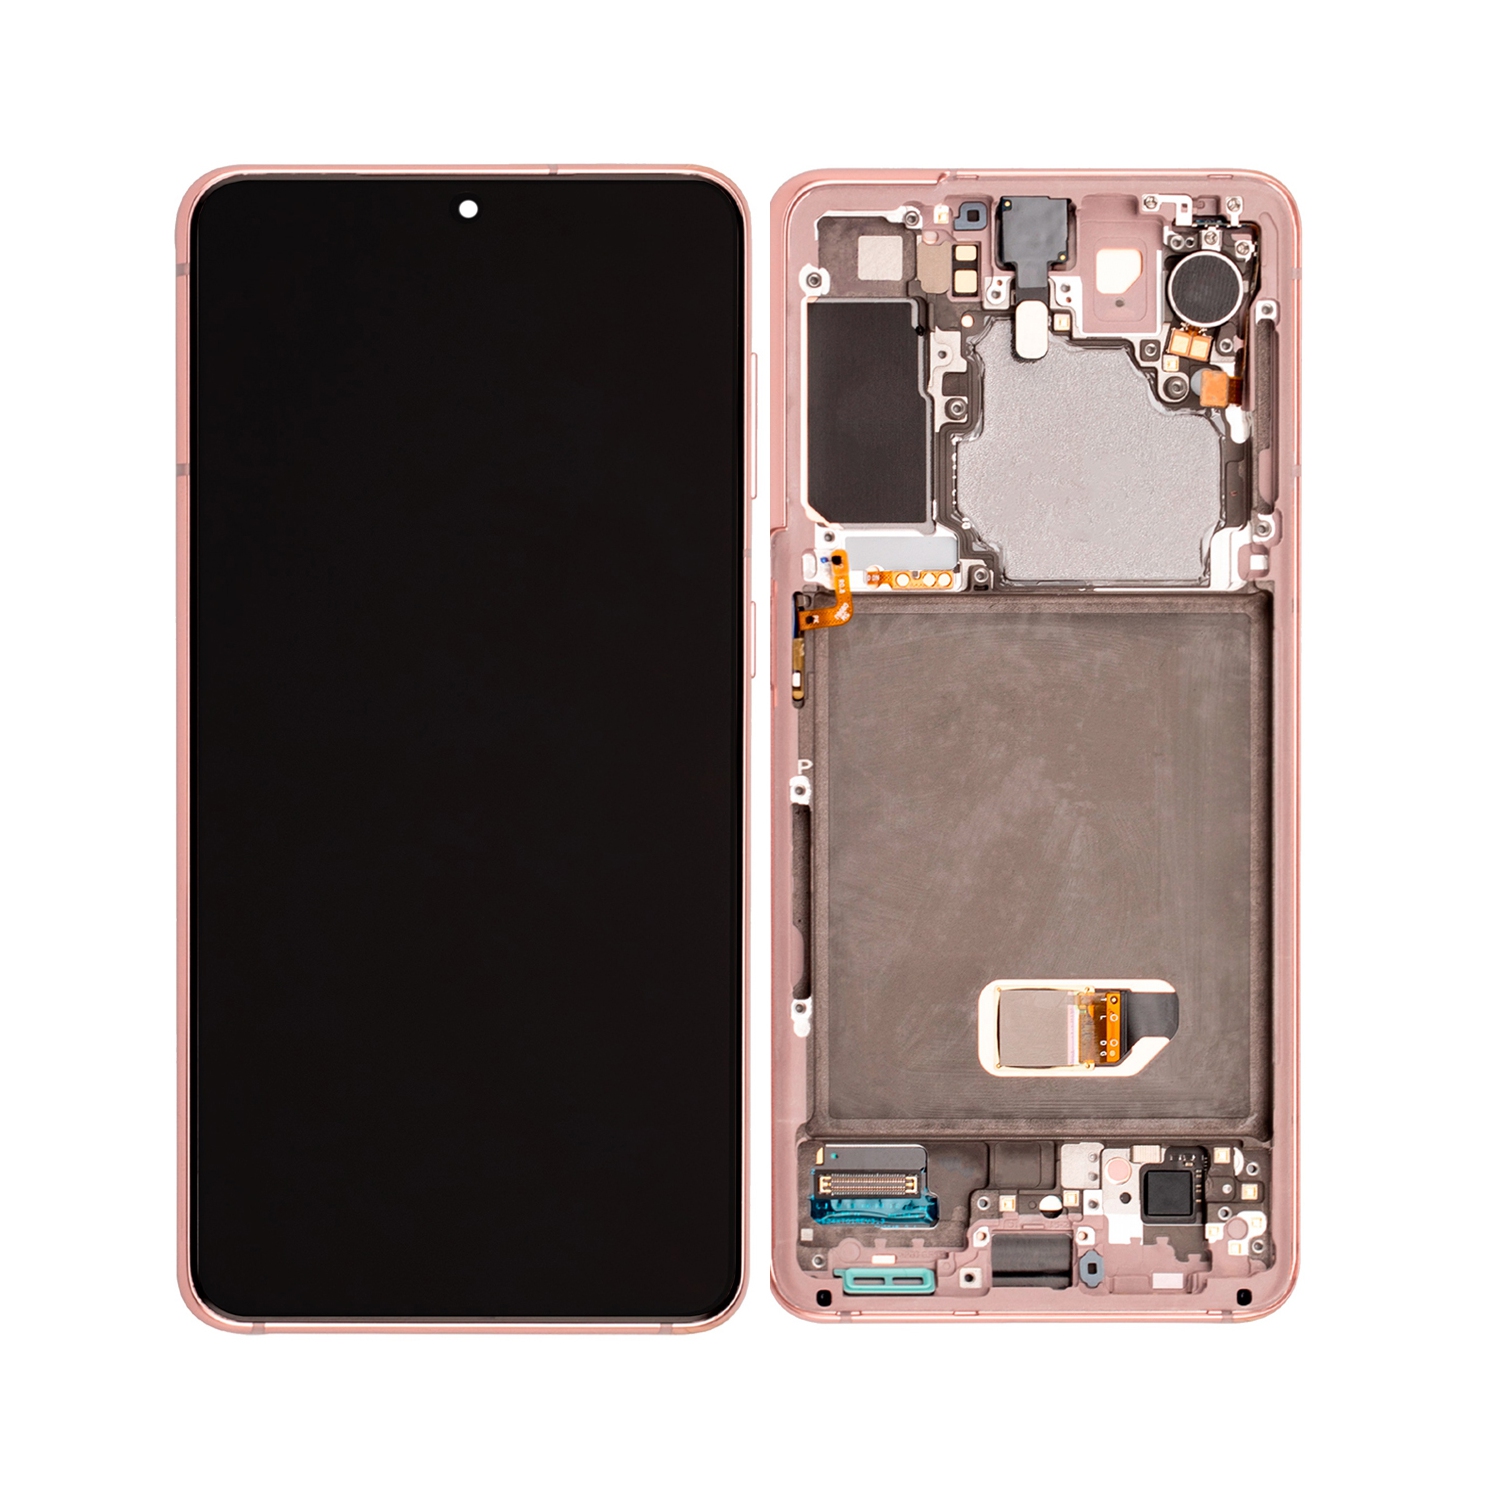 LCD Display Touch Screen Digitizer Assembly With Frame For Samsung Galaxy S21 5G (SM-G991W) - Phantom Pink (Refurbished)